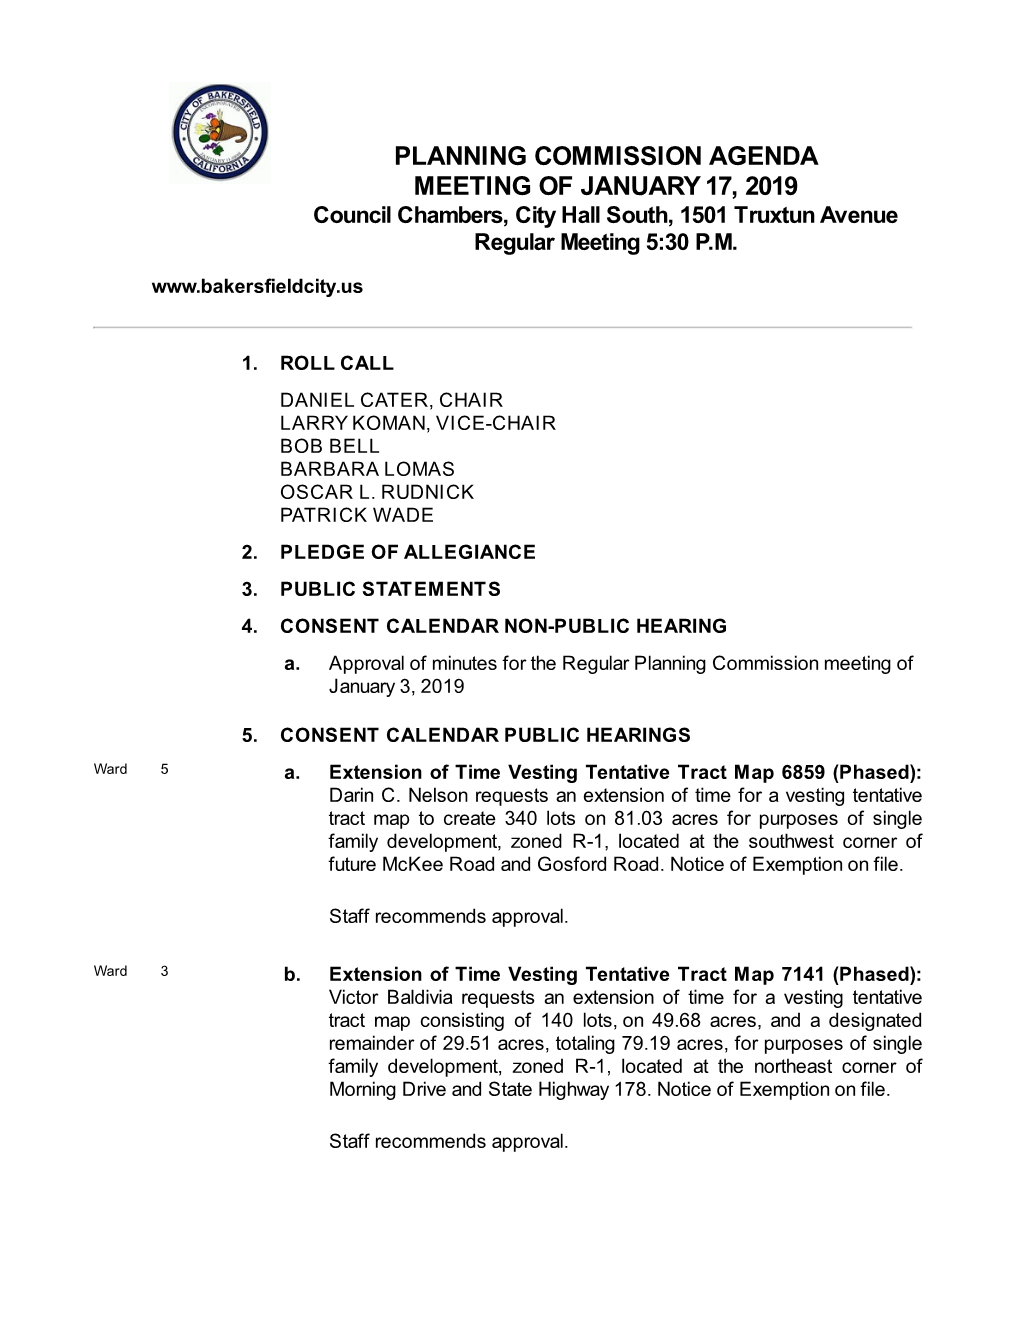 PLANNING COMMISSION AGENDA MEETING of JANUARY 17, 2019 Council Chambers, City Hall South, 1501 Truxtun Avenue Regular Meeting 5:30 P.M